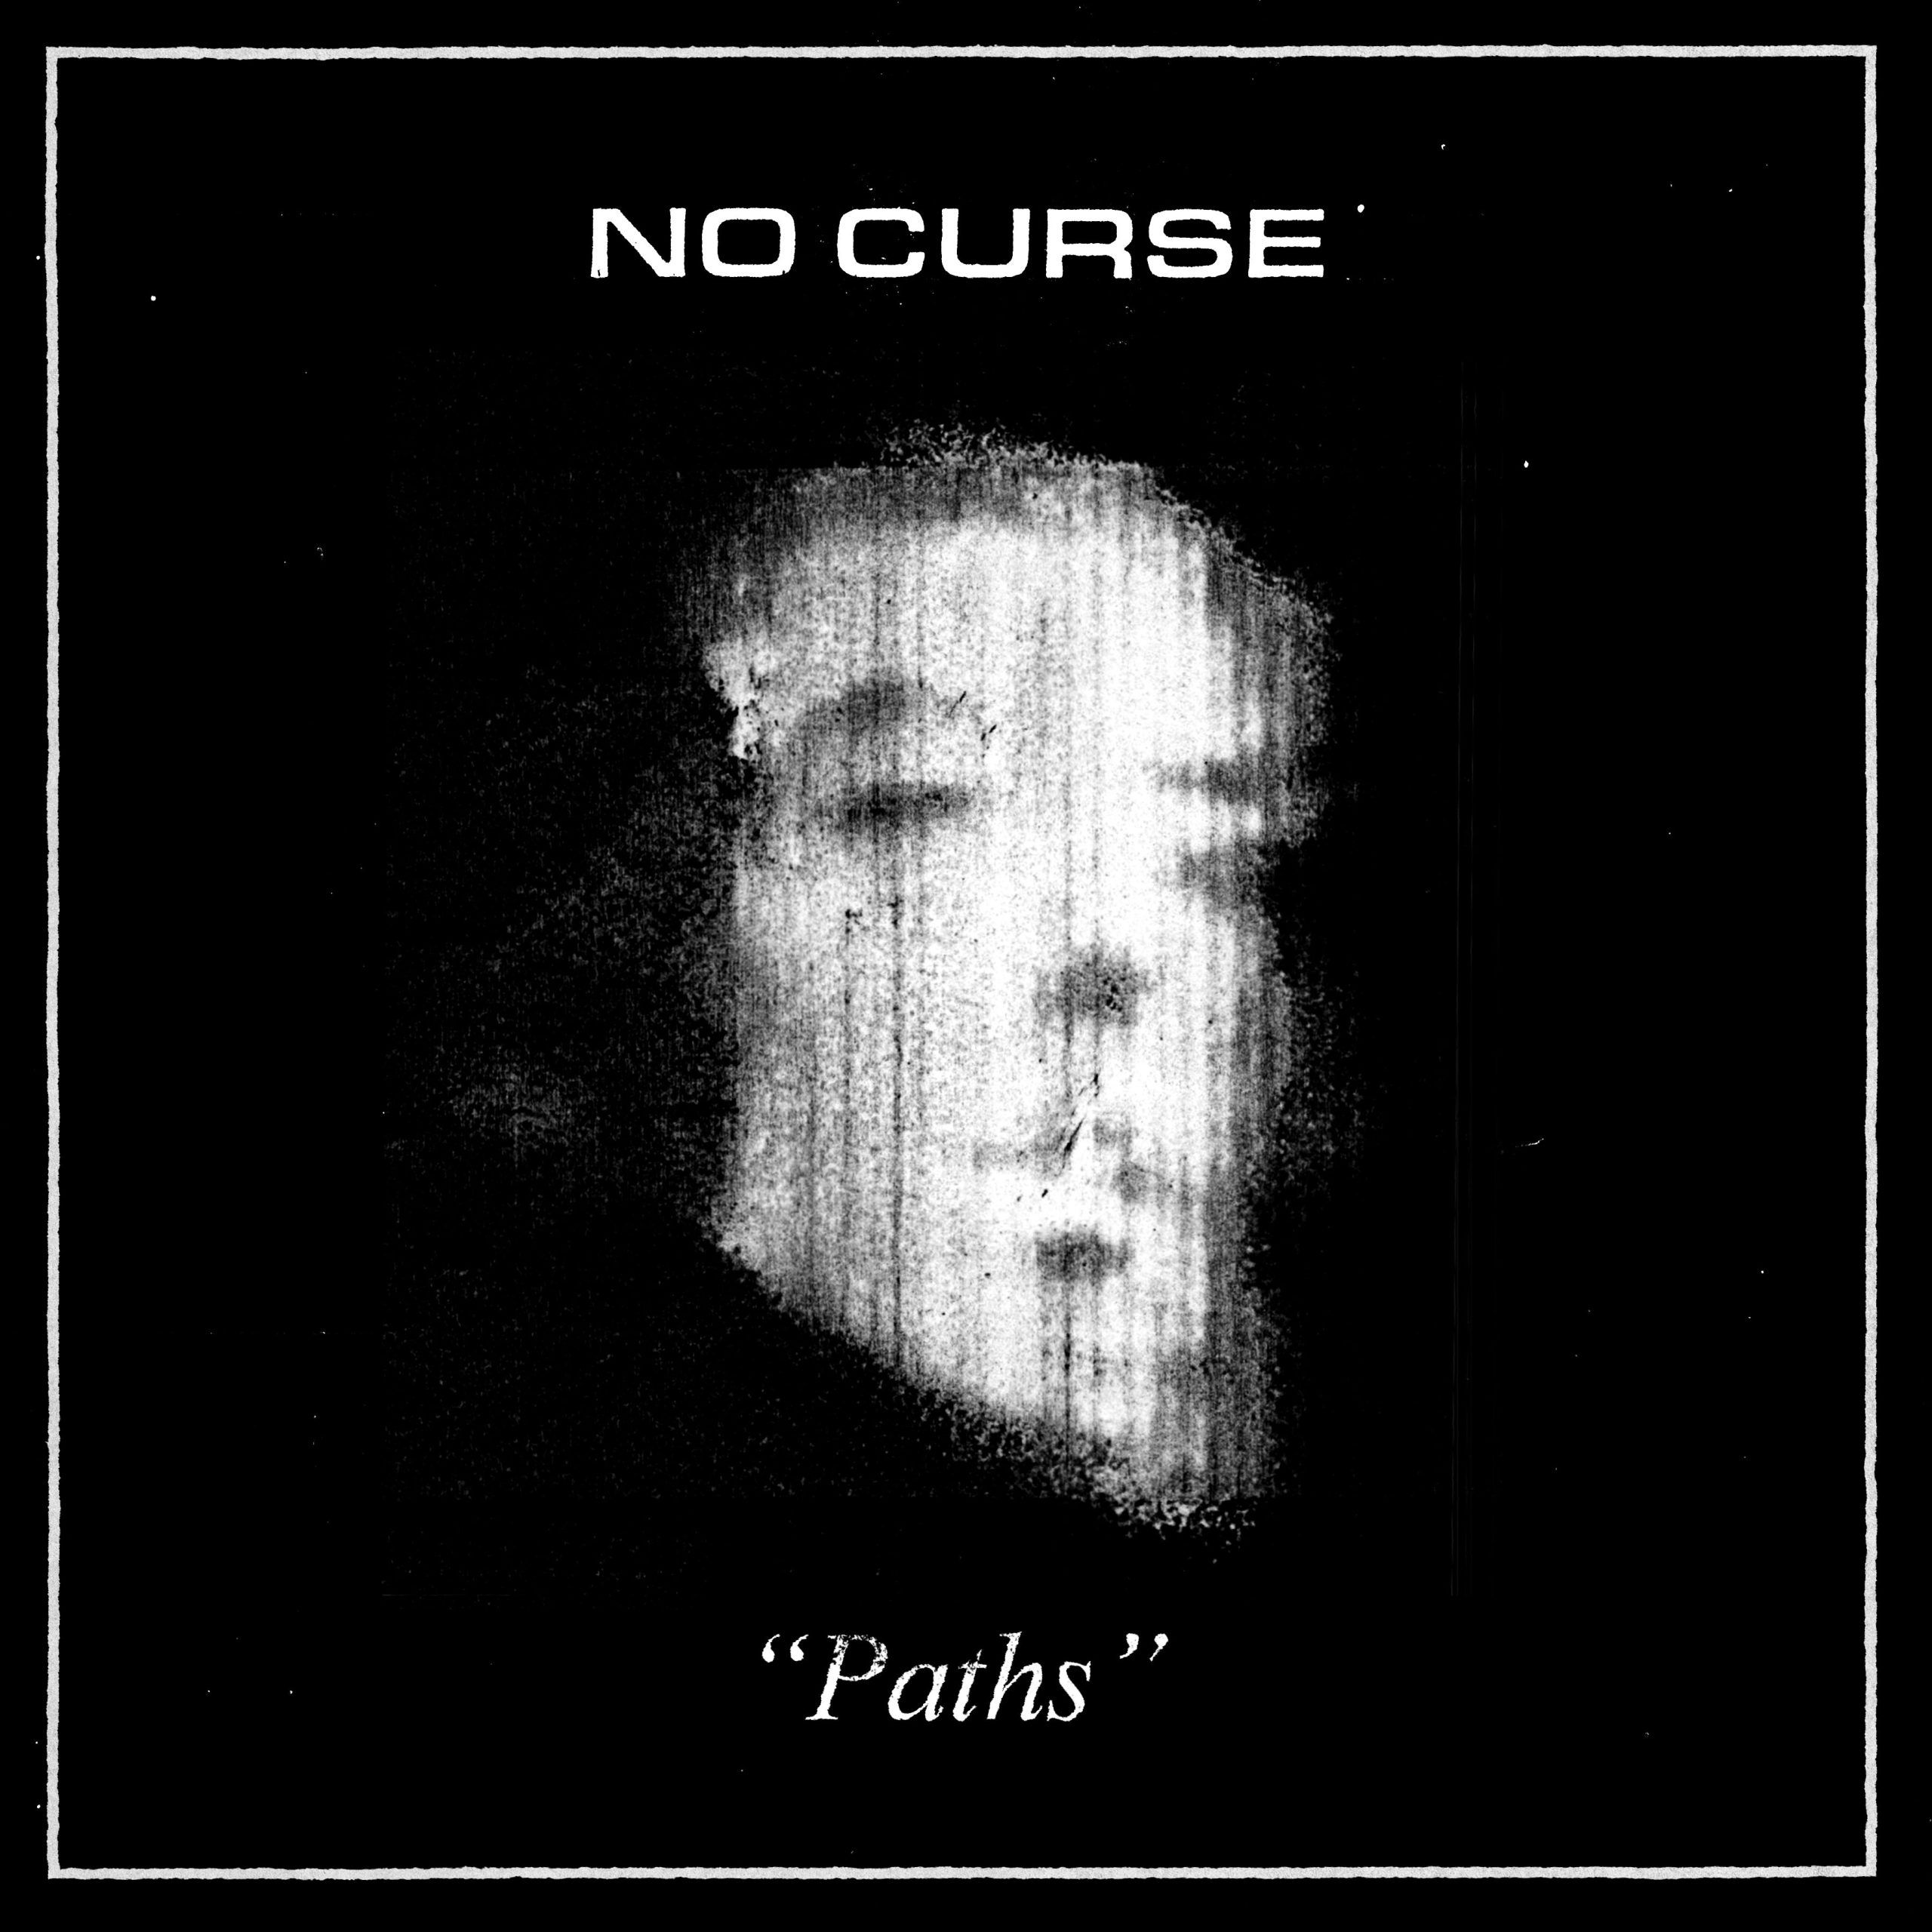 Listen to the Sombre Post-Punk of No Curse’s Debut Single “Paths”